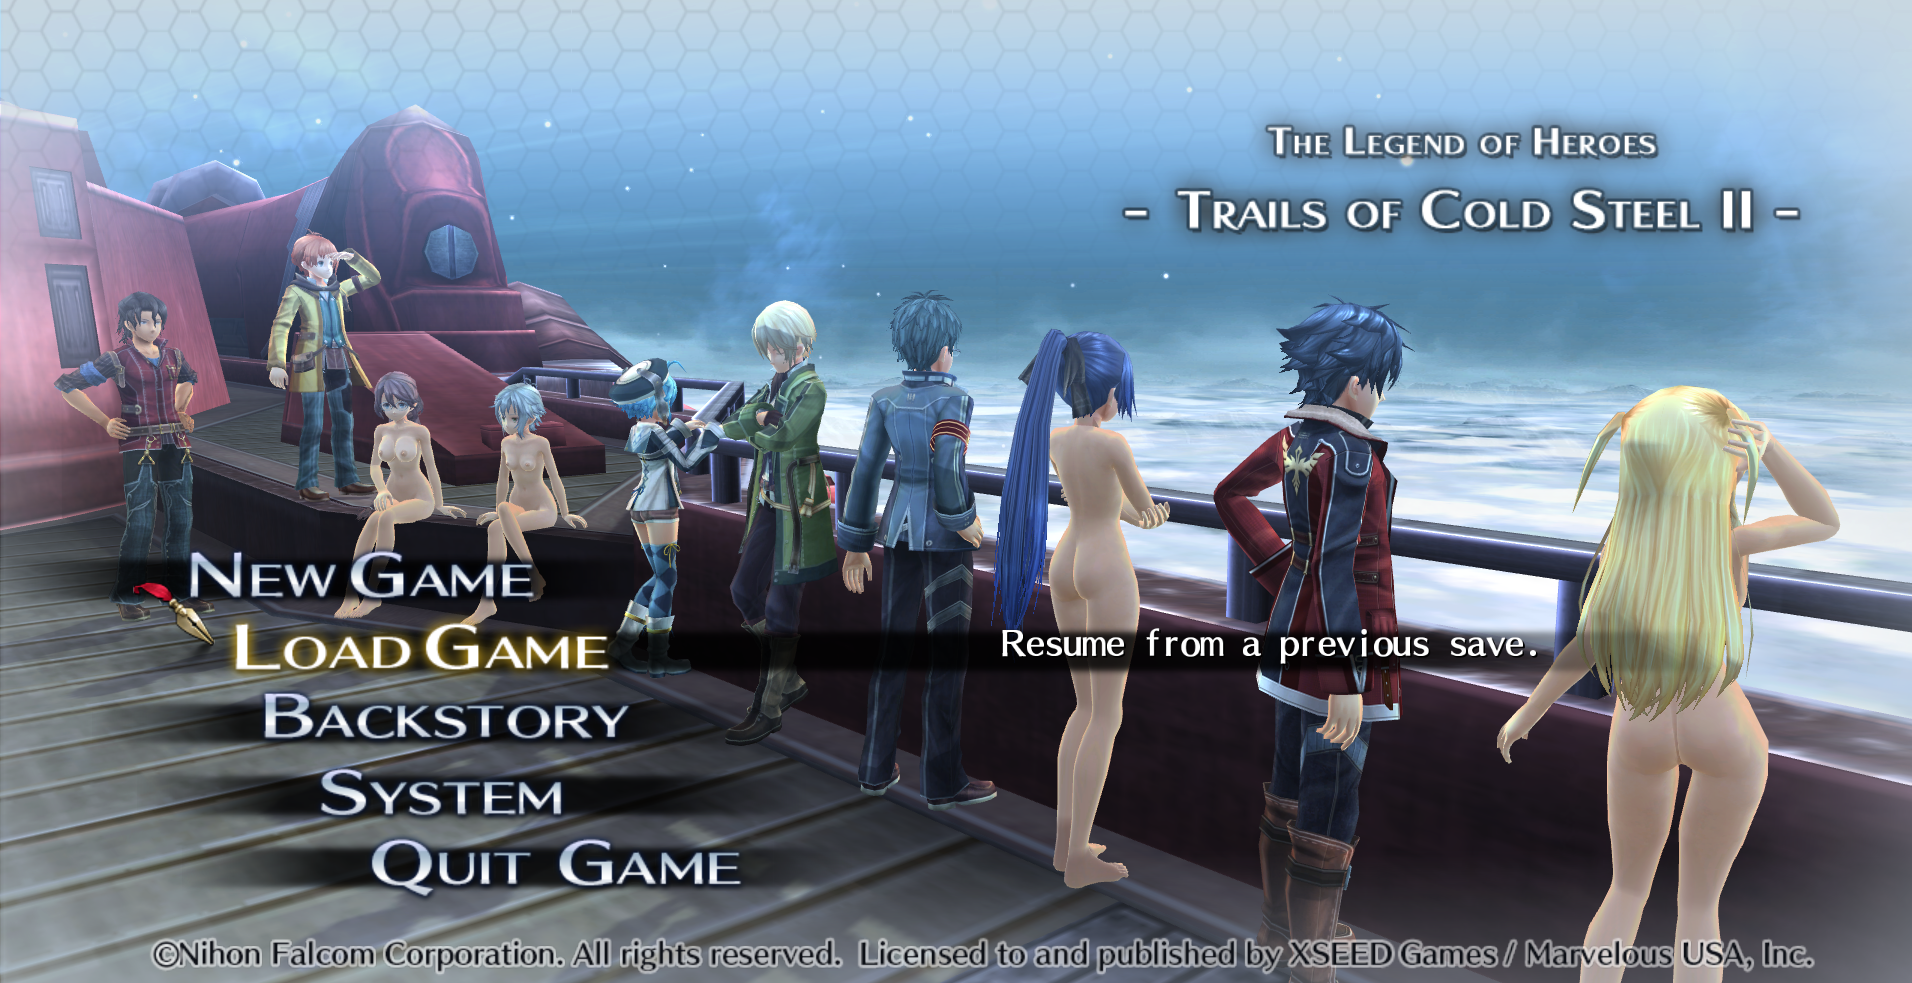 1790340805_2022-09-0815_27_21-TheLegendofHeroes-TrailsofColdSteel(D3D11)_SteamEnabled_GoGInited.png.04135d031d7aa644b37f0a08322caa7f.png